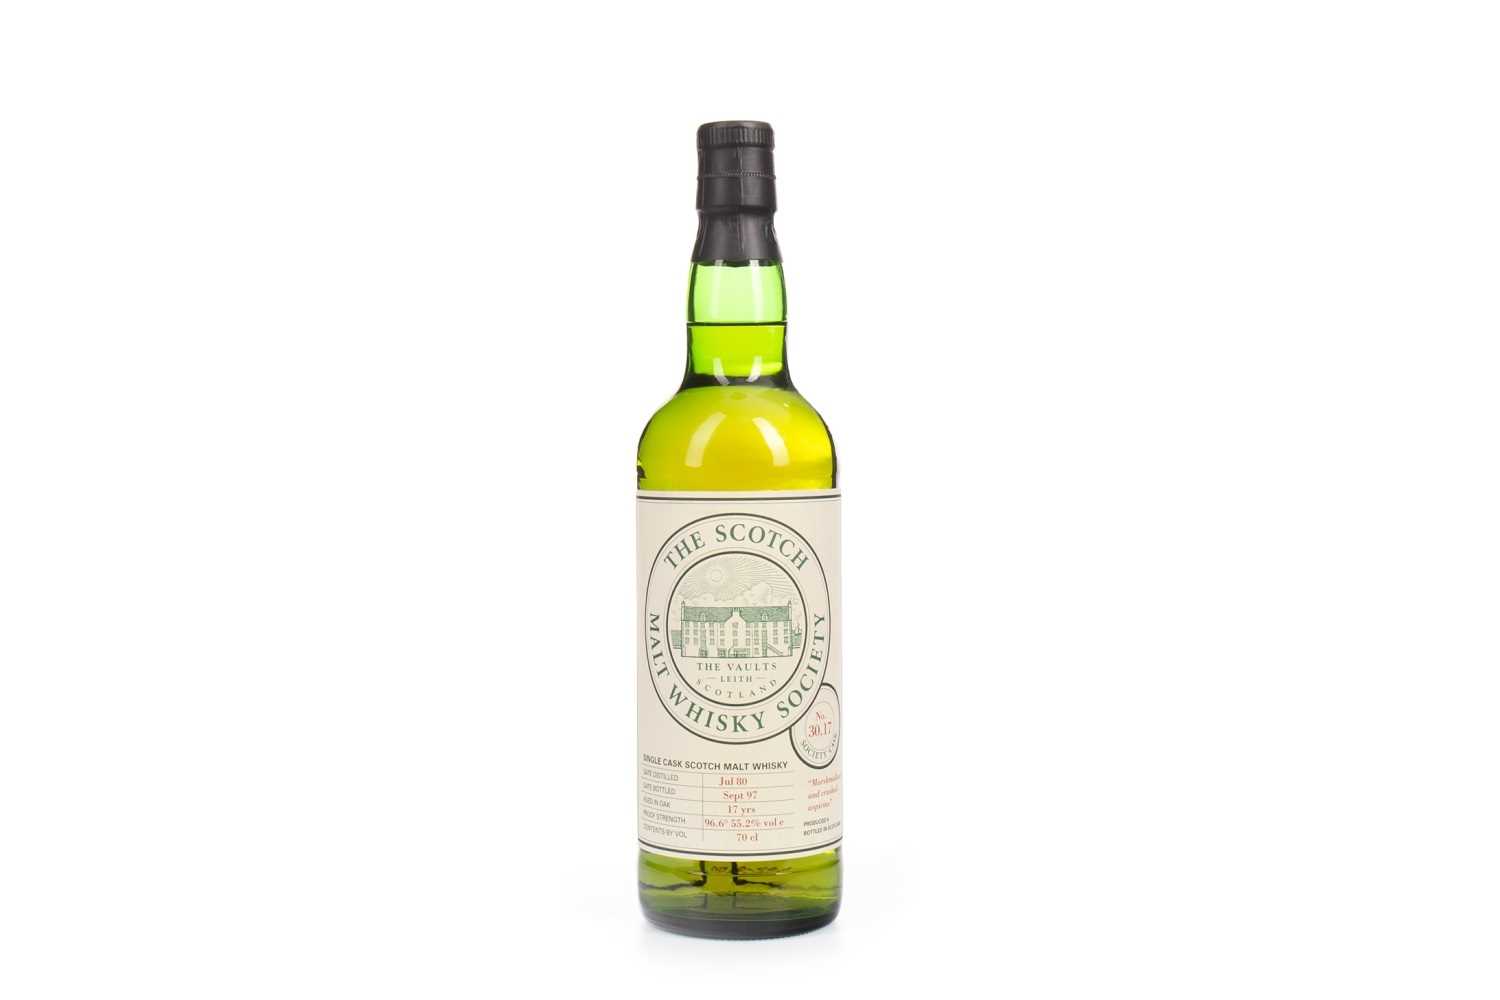 Lot 194 - GLENROTHES 1980 SMWS 30.17 AGED 17 YEARS